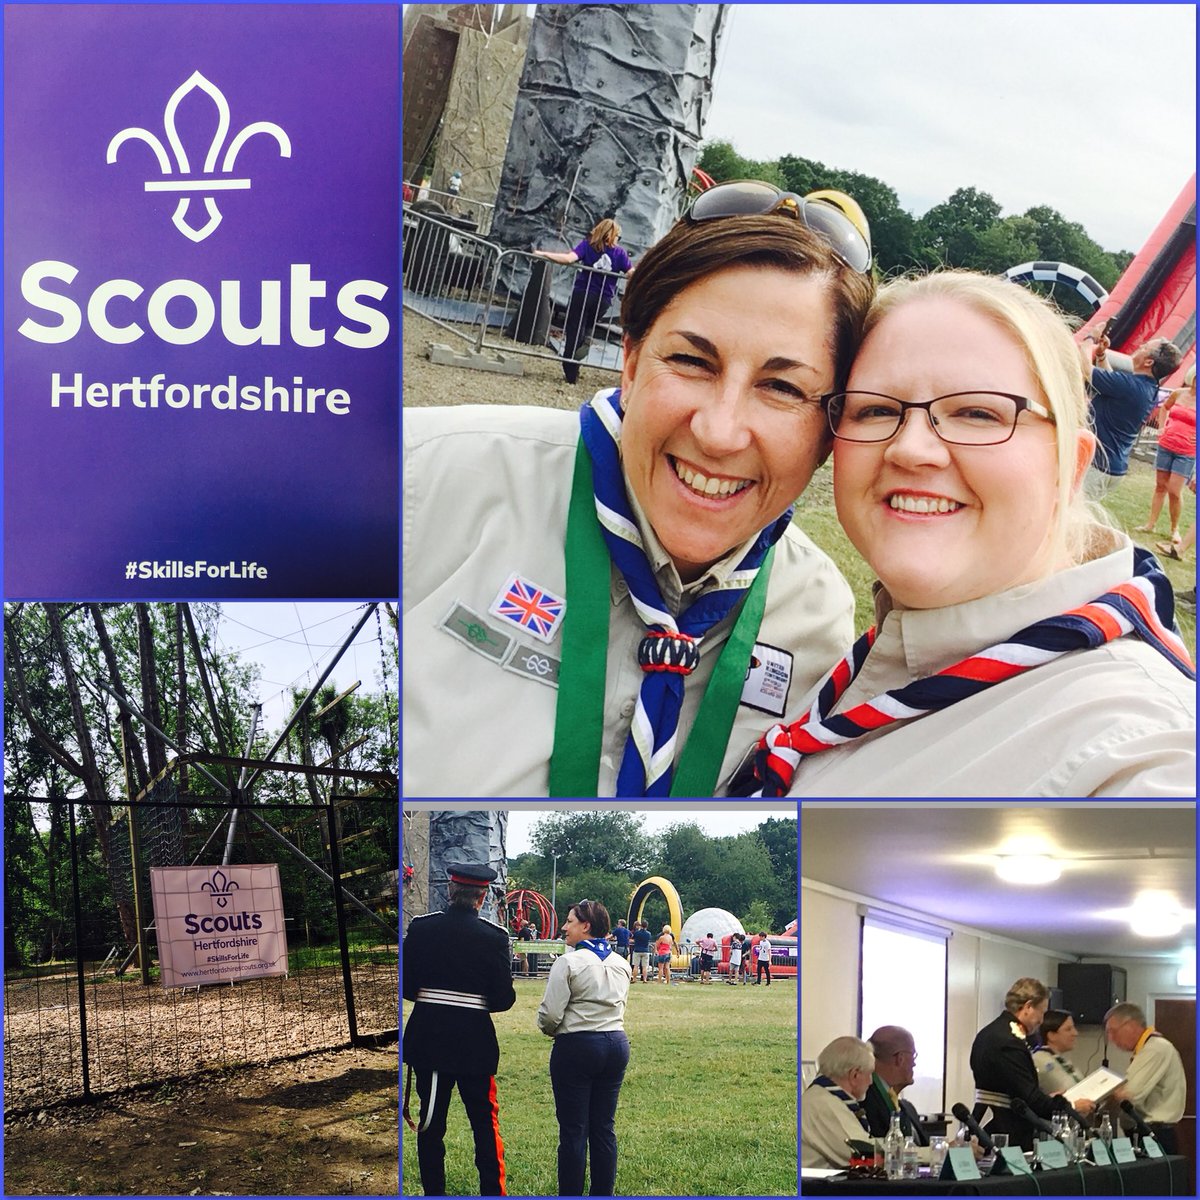 Super #Scouting day @phaselswood with @CCHertsScouts for @HertsScouts AGM ⚜️ @hertslieutenant #Programme #Diversity More #growth in volunteers & young people, but we need more to ensure every young person has the #opportunityofadventure in #countyofopportunity #Hertfordshire 🌳